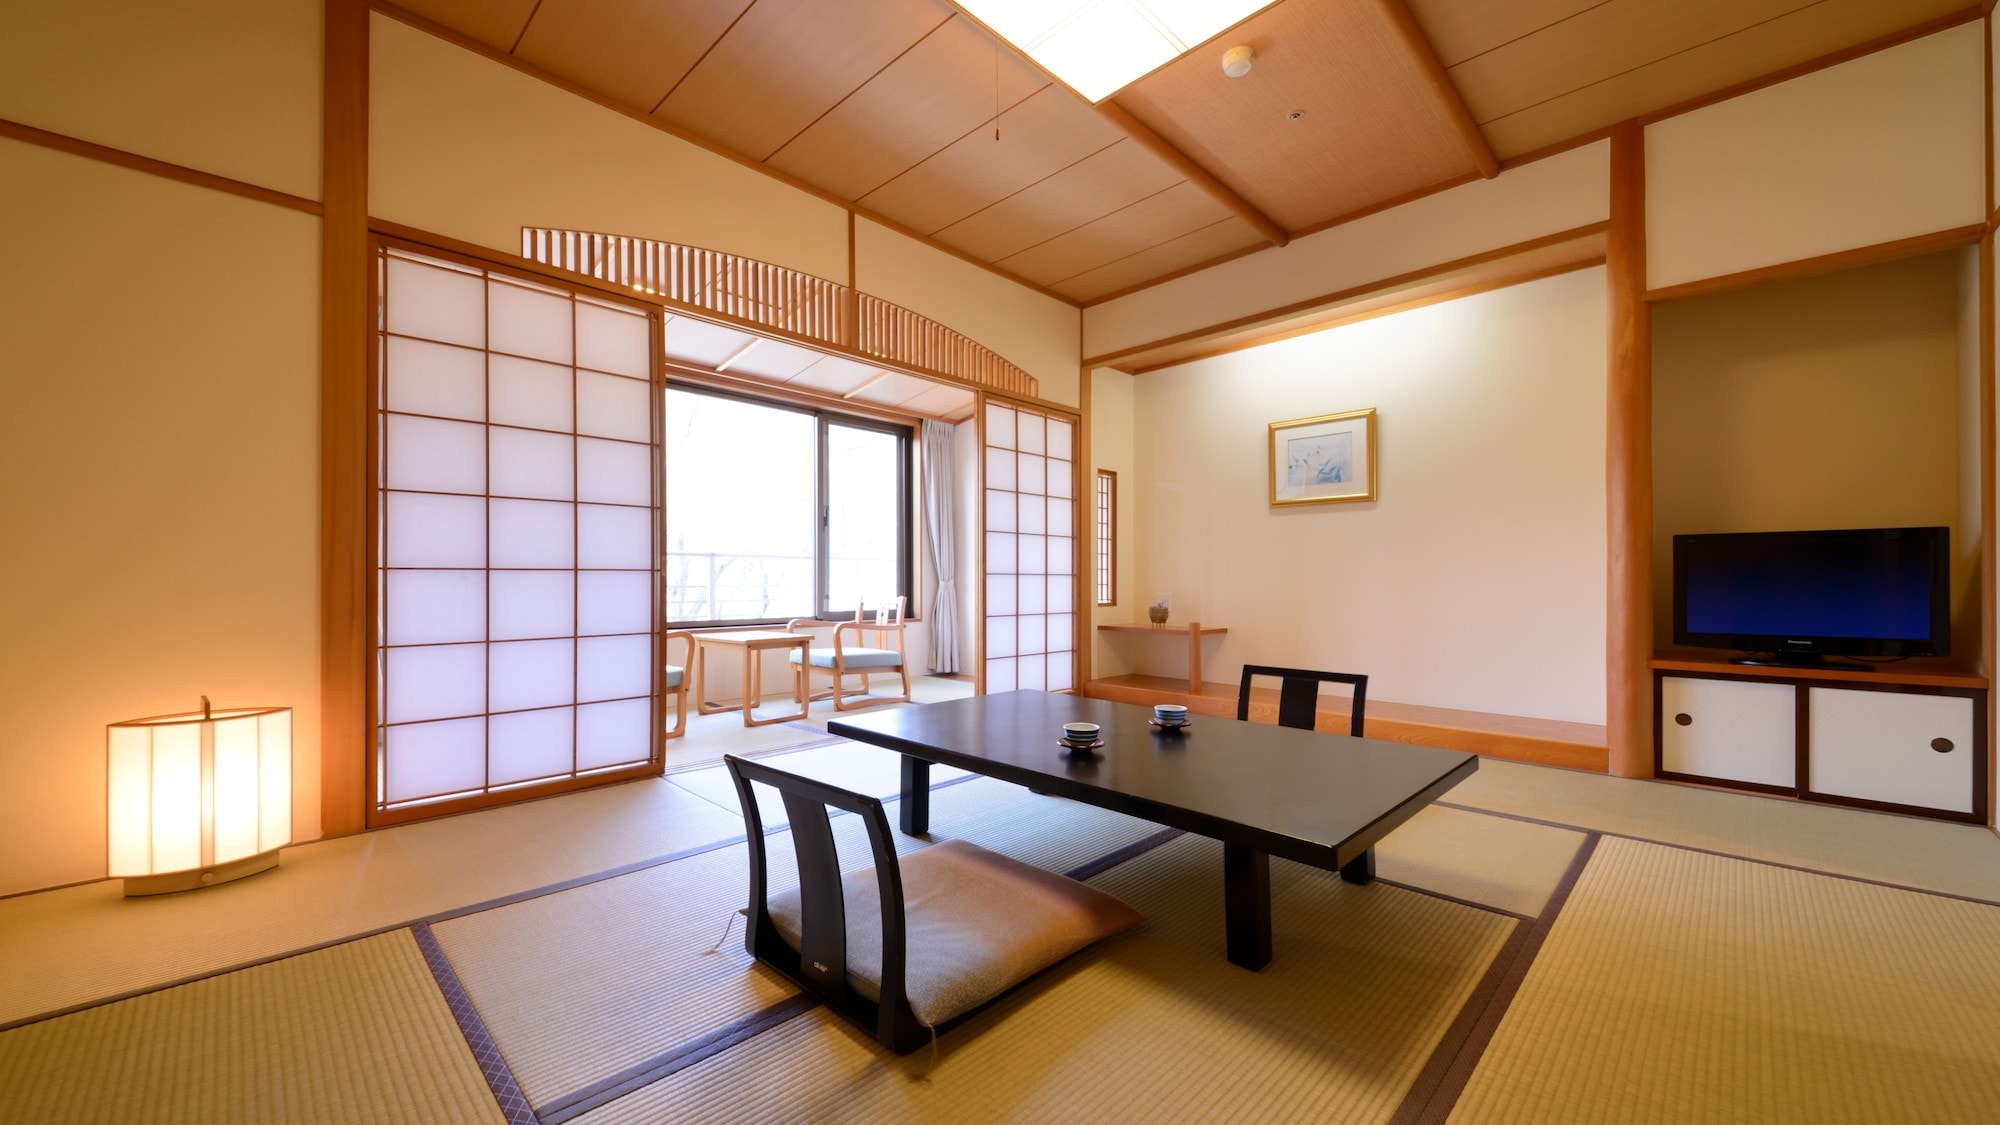 Japanese style room. Please spend a relaxing time surrounded by the scent of rush in the Sukiya-zukuri style of traditional Japanese architecture.